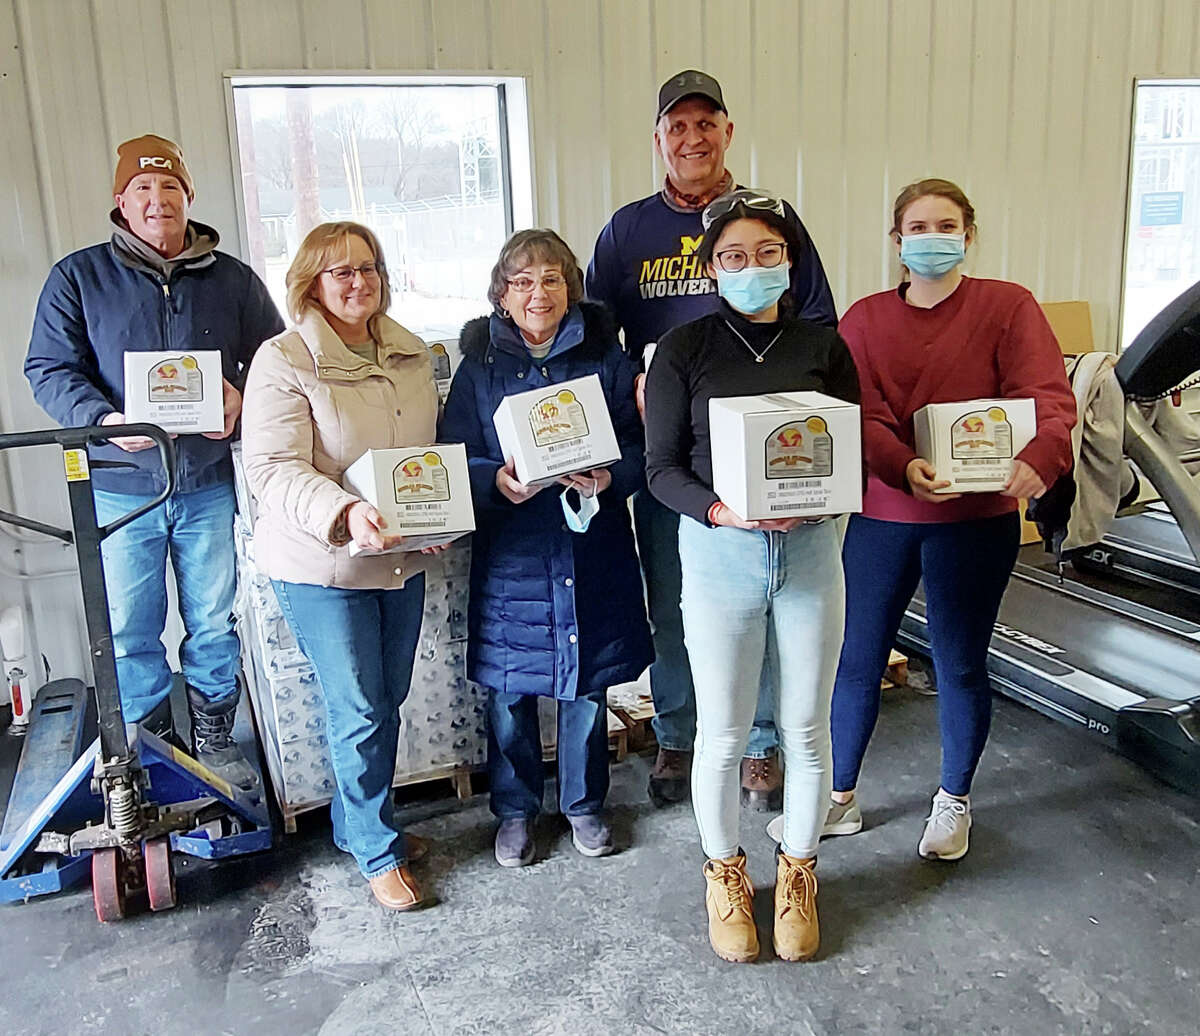 In December, PCA donated more than 100 hams to the  Matthew 25:35 Food Pantry. Pictured (front row, left to right) are Michelle Grassa, Joan Gamache, from Matthew 25:35 Food Pantry; Packaging Corporation of America employees: Angela Wang, environmental engineer; Christine Rogers, system analyst; (back row) Rod Gamache, power house oiler; Dave Cameron, union chief steward, of Steel Workers Union 12585.